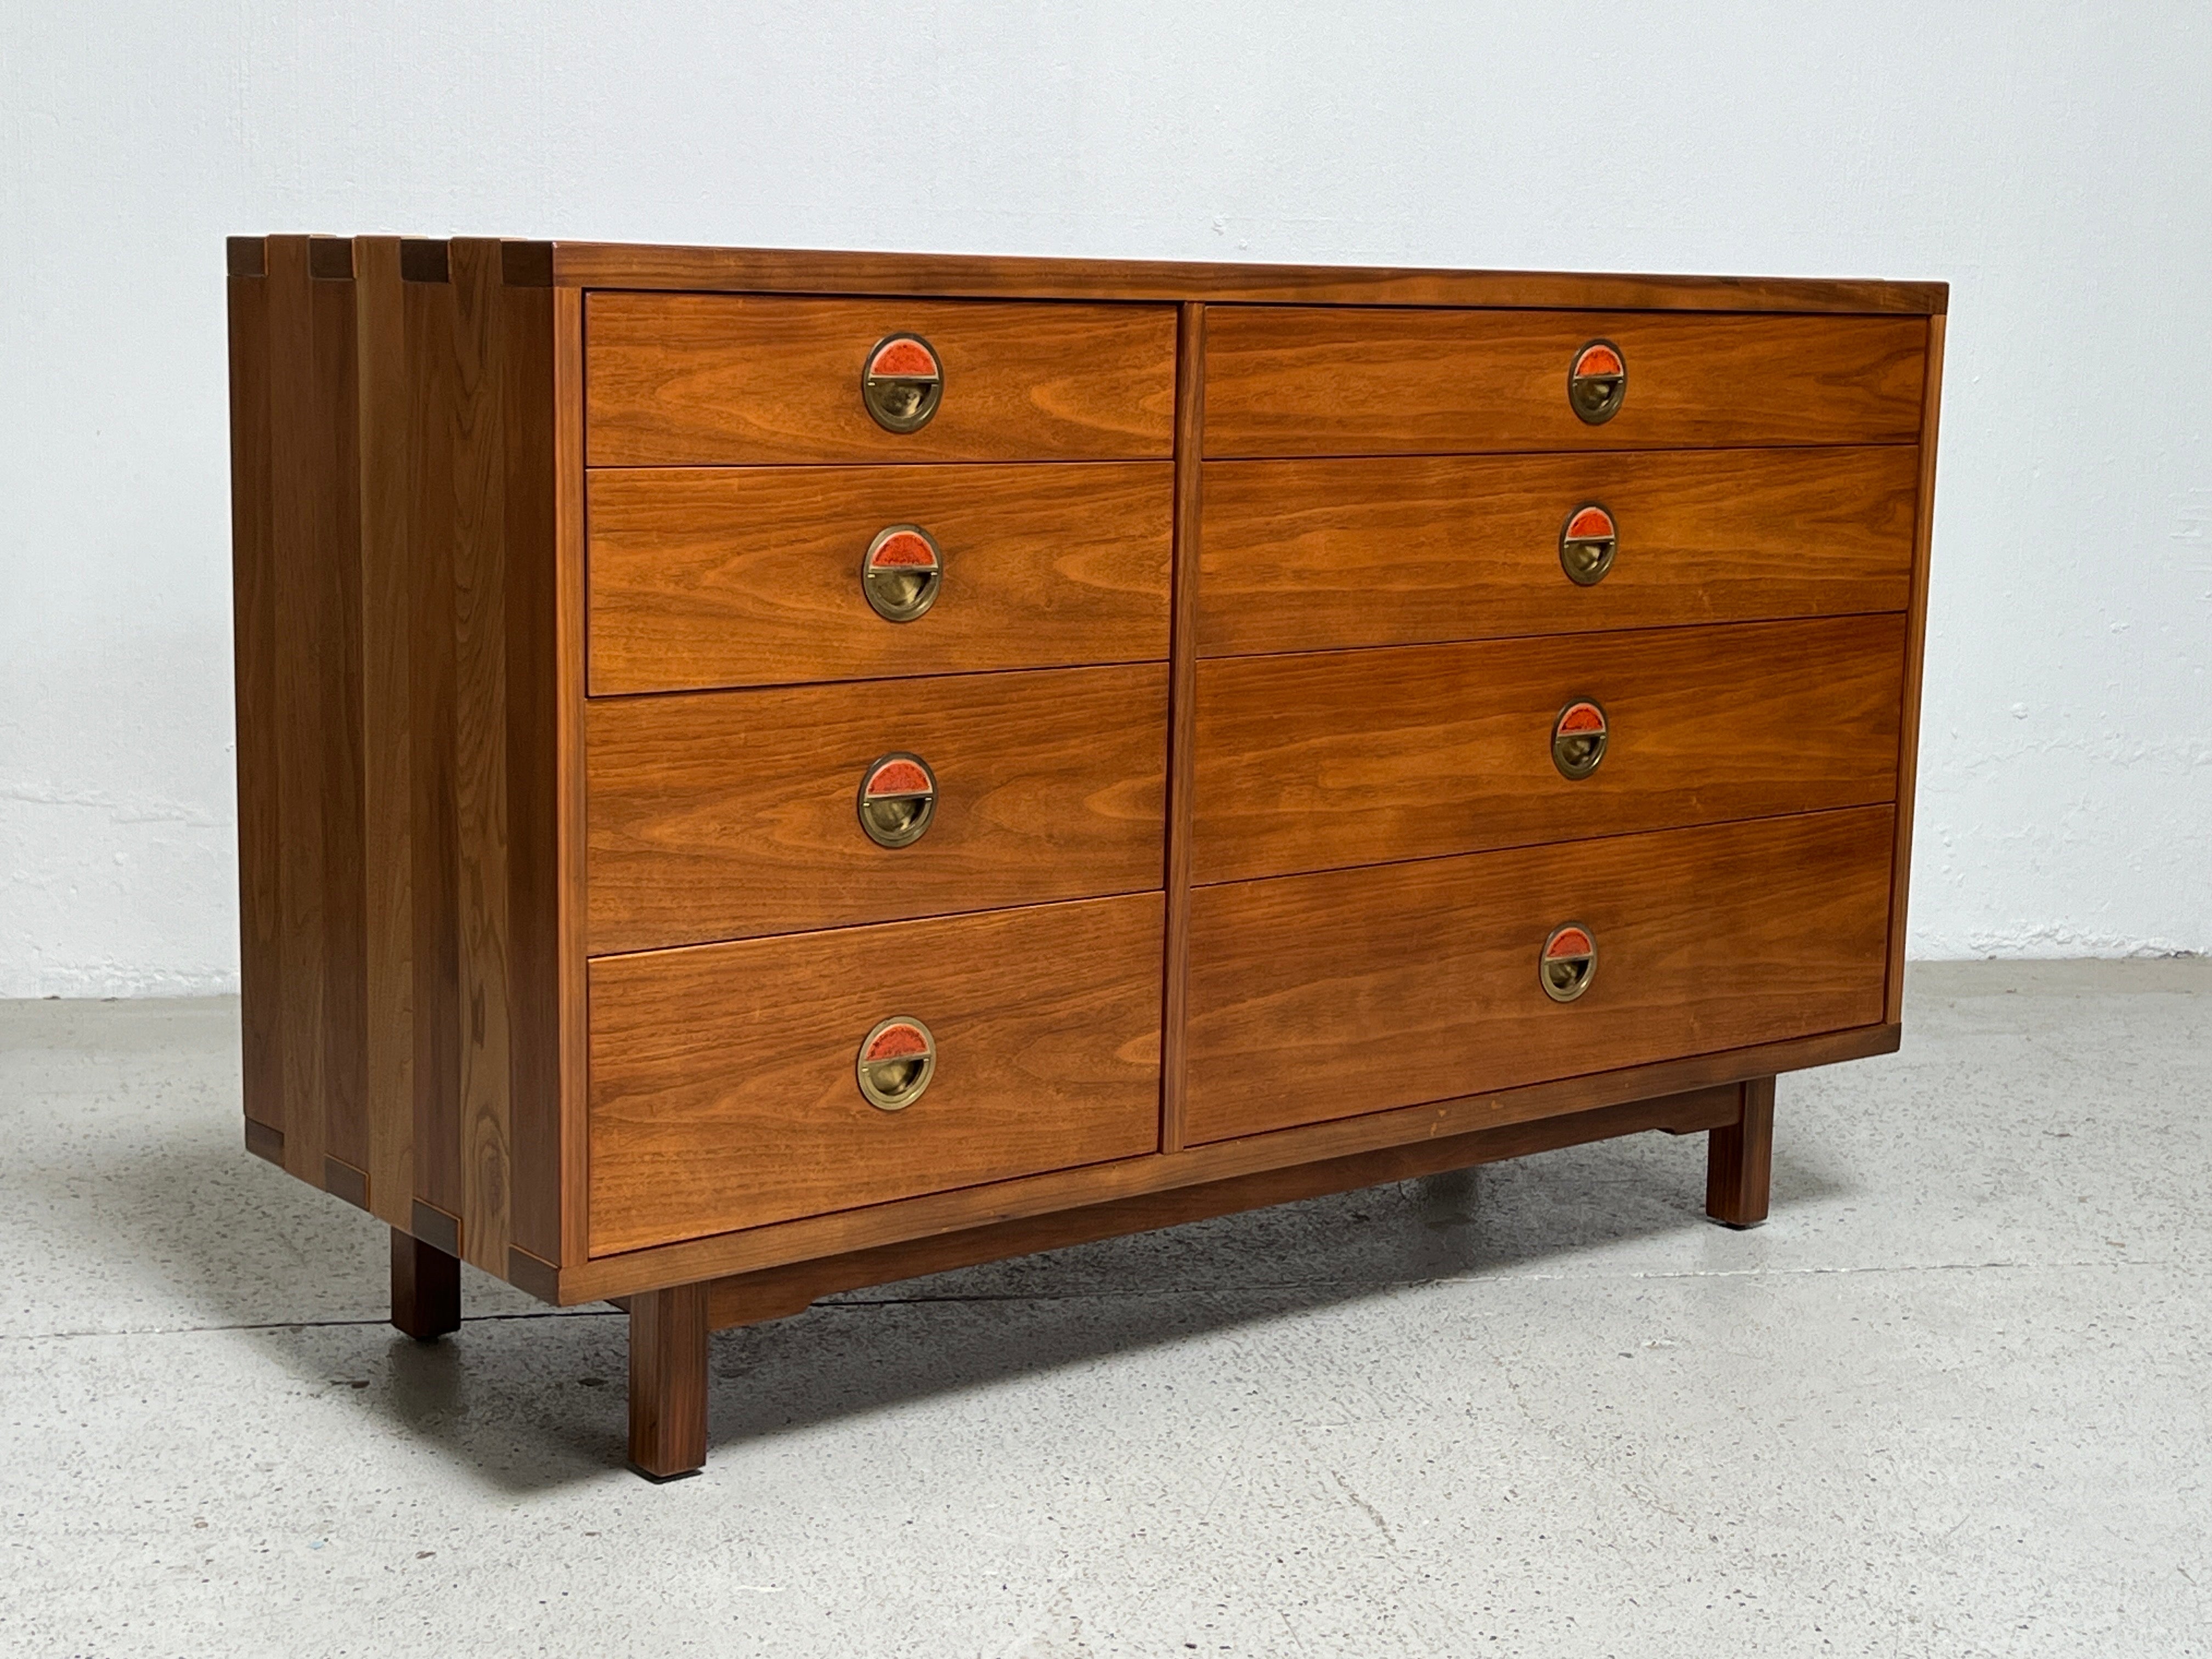 A rare chest designed by Edward Wormley for Dunbar. Solid walnut construction with exposed joinery and brass pulls with ceramic tiles by greta and Otto Natzler. Matching dresser available separately.